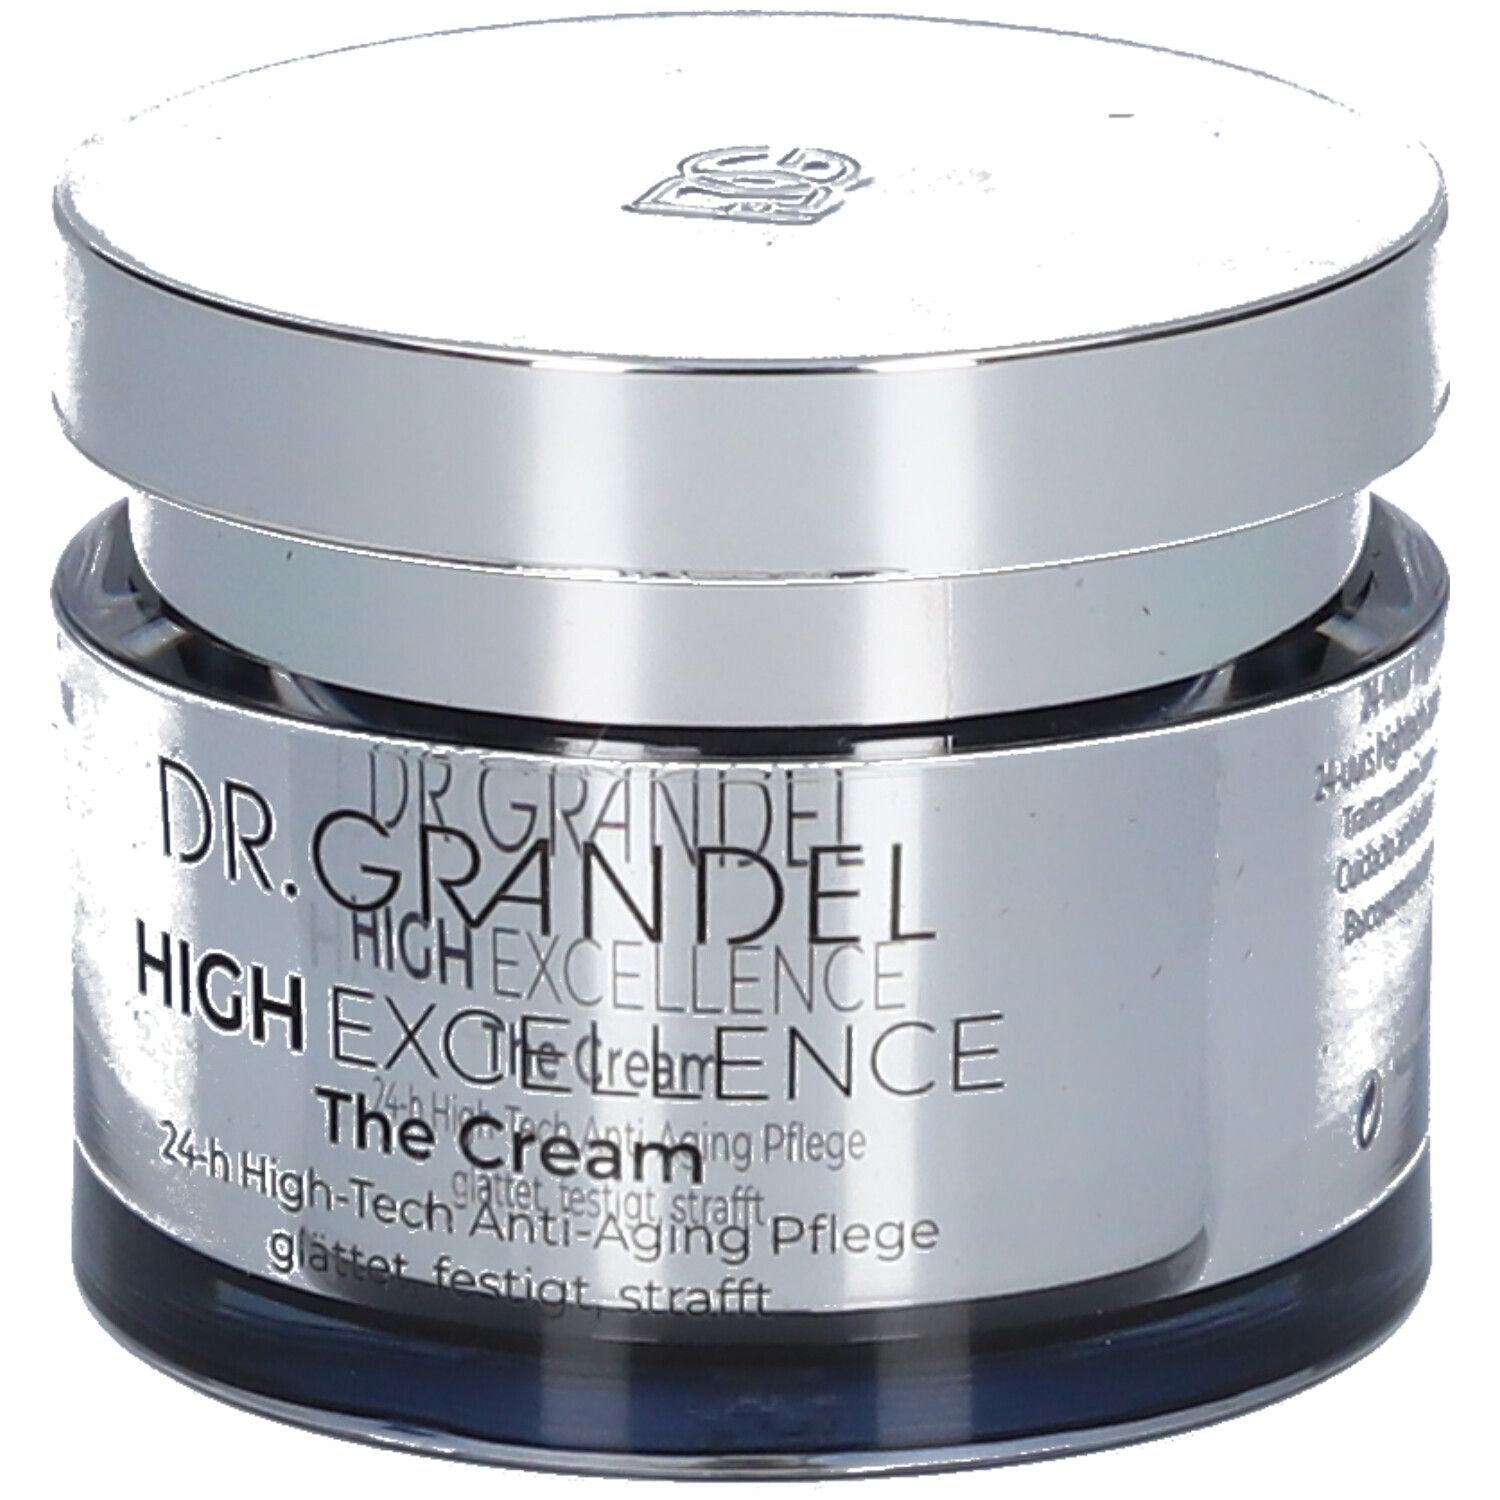 Dr. Grandel High Excellence The Cream